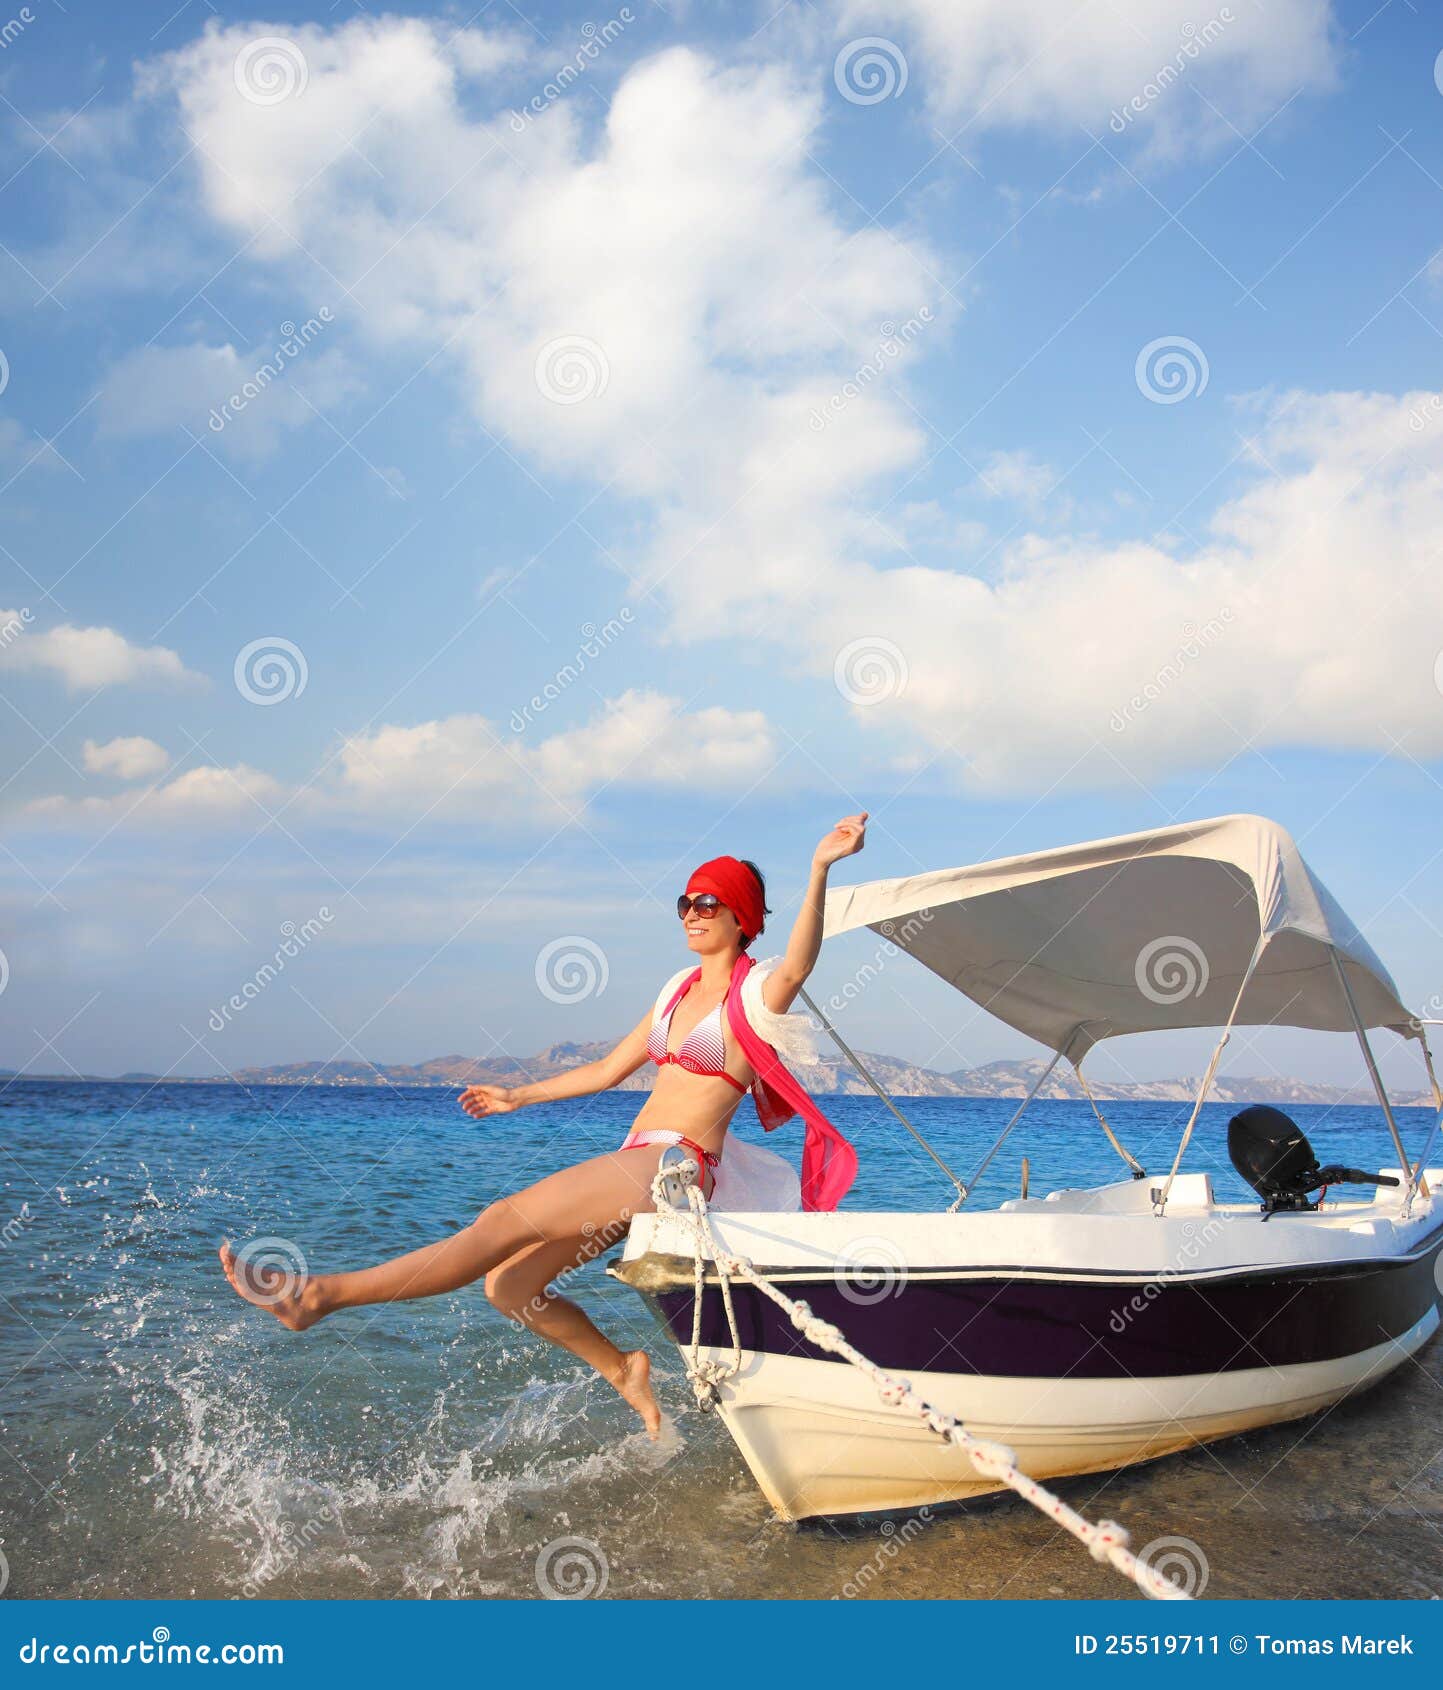 Sexy Woman On Boat During Summer Stock Image Image 25519711